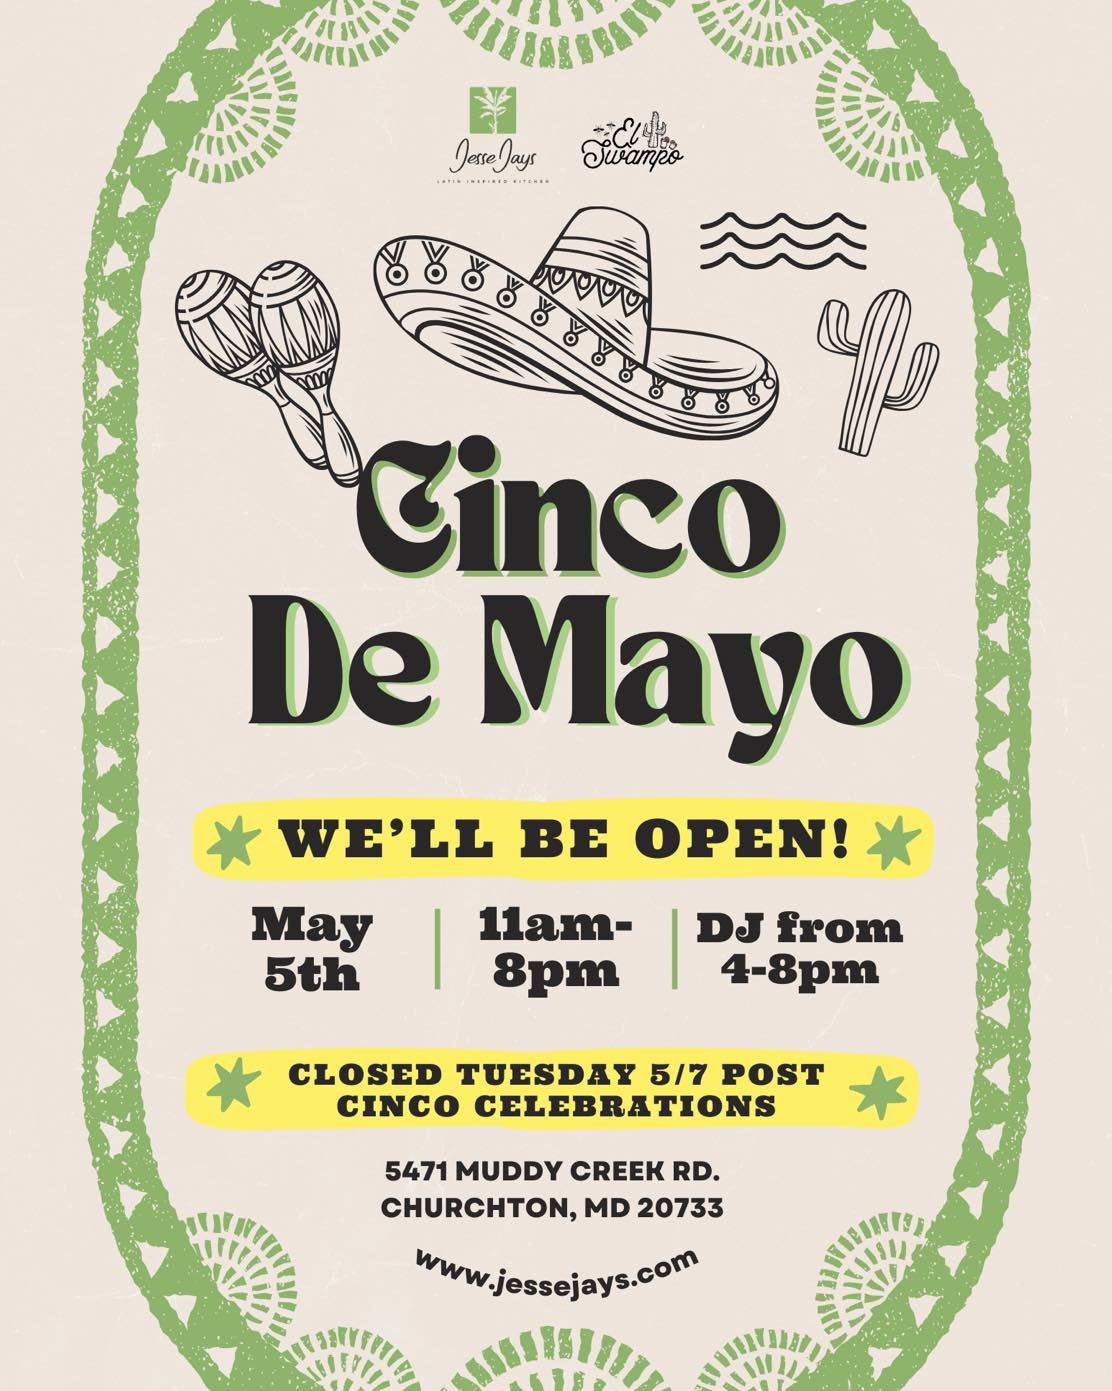 🎉🌮🍹 Get ready for a spectacular Cinco de Mayo celebration at JesseJay's Latin Inspired Kitchen! We're opening at 11 AM Sunday, May 5th, for an all-day fiesta that's too good to miss. 🎶💃

🥳 Join us for the festivities as they kick off with givea